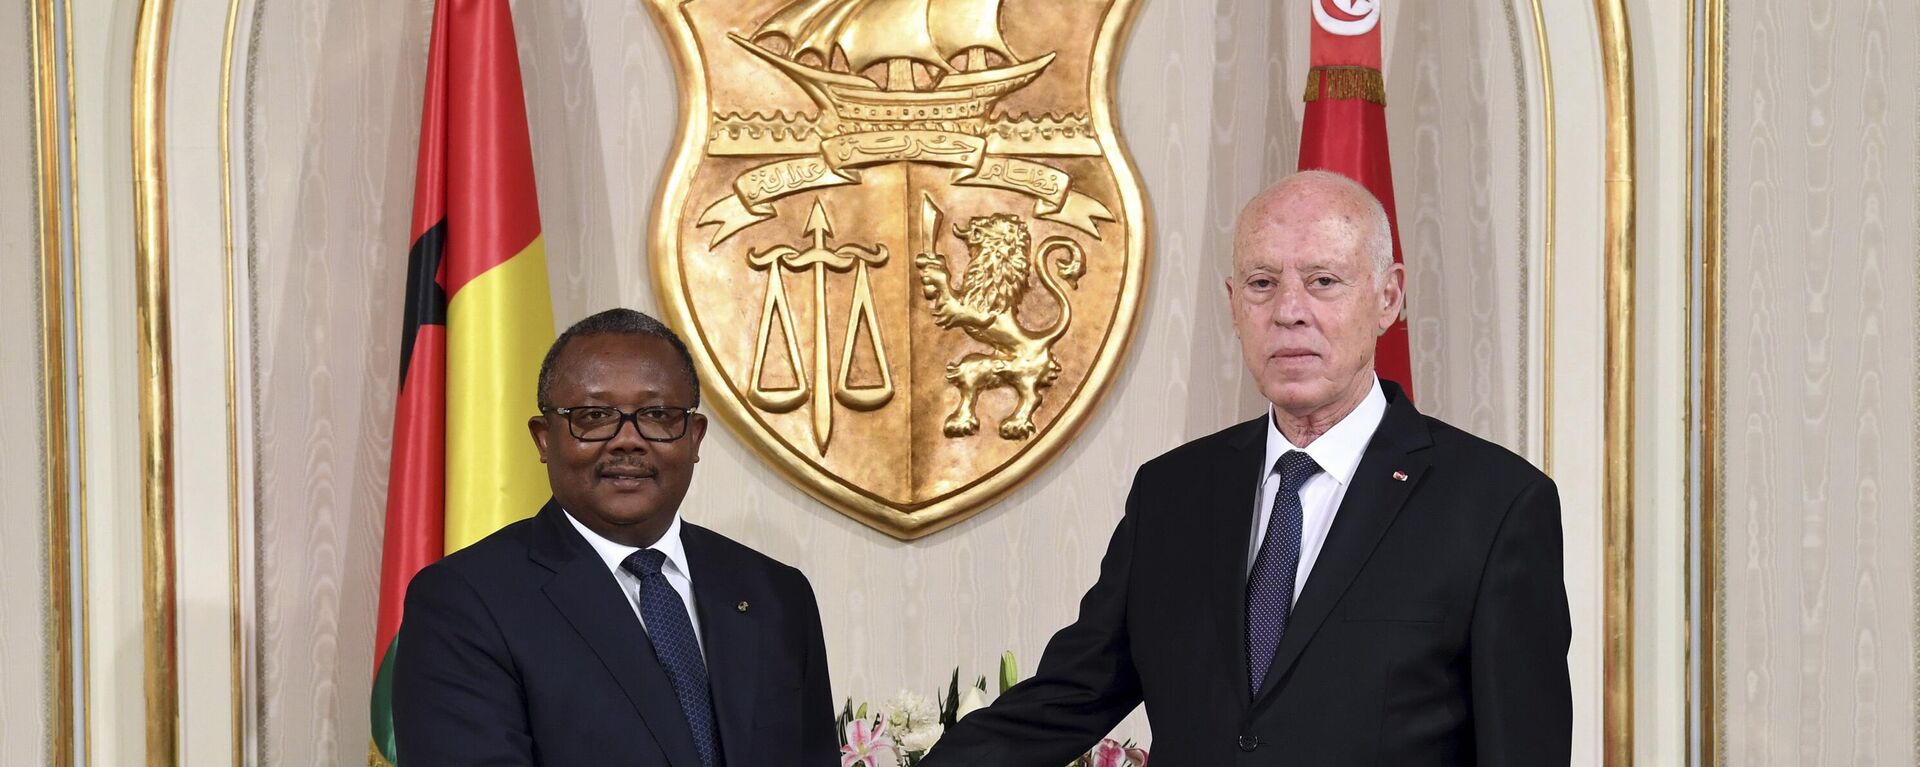 Tunisian President Kais Saied, right, shakes hands with President of Guinea-Bissau Umaro Sissoco Embalo before a meeting in Carthage, near Tunis, Tunisia, Wednesday, March 8, 2023 - Sputnik International, 1920, 09.03.2023